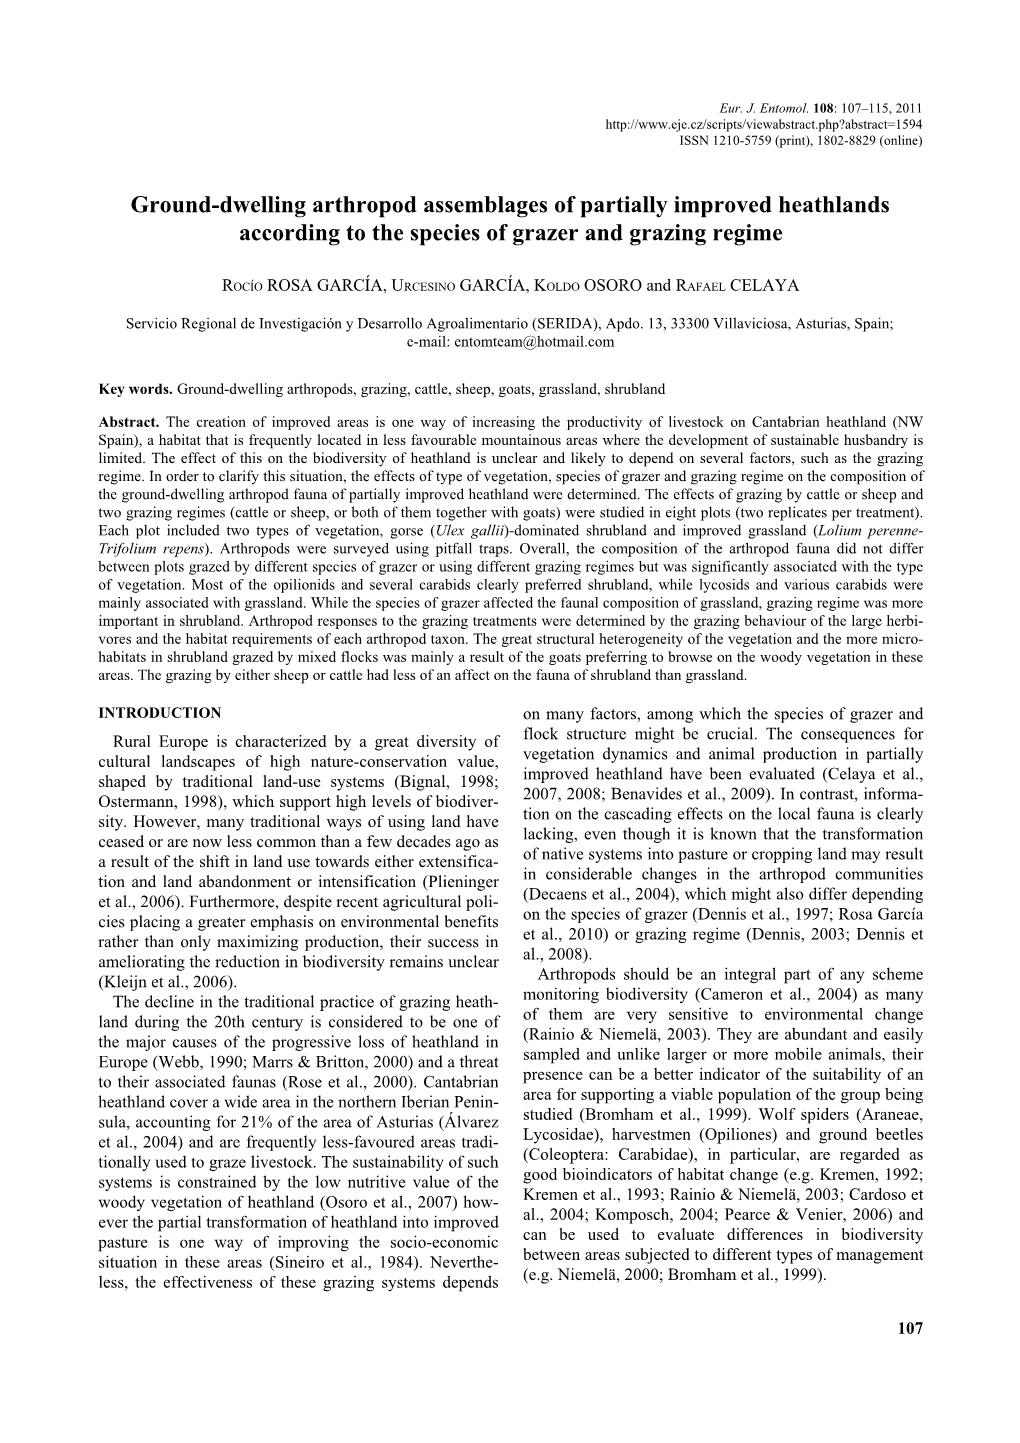 Ground-Dwelling Arthropod Assemblages of Partially Improved Heathlands According to the Species of Grazer and Grazing Regime